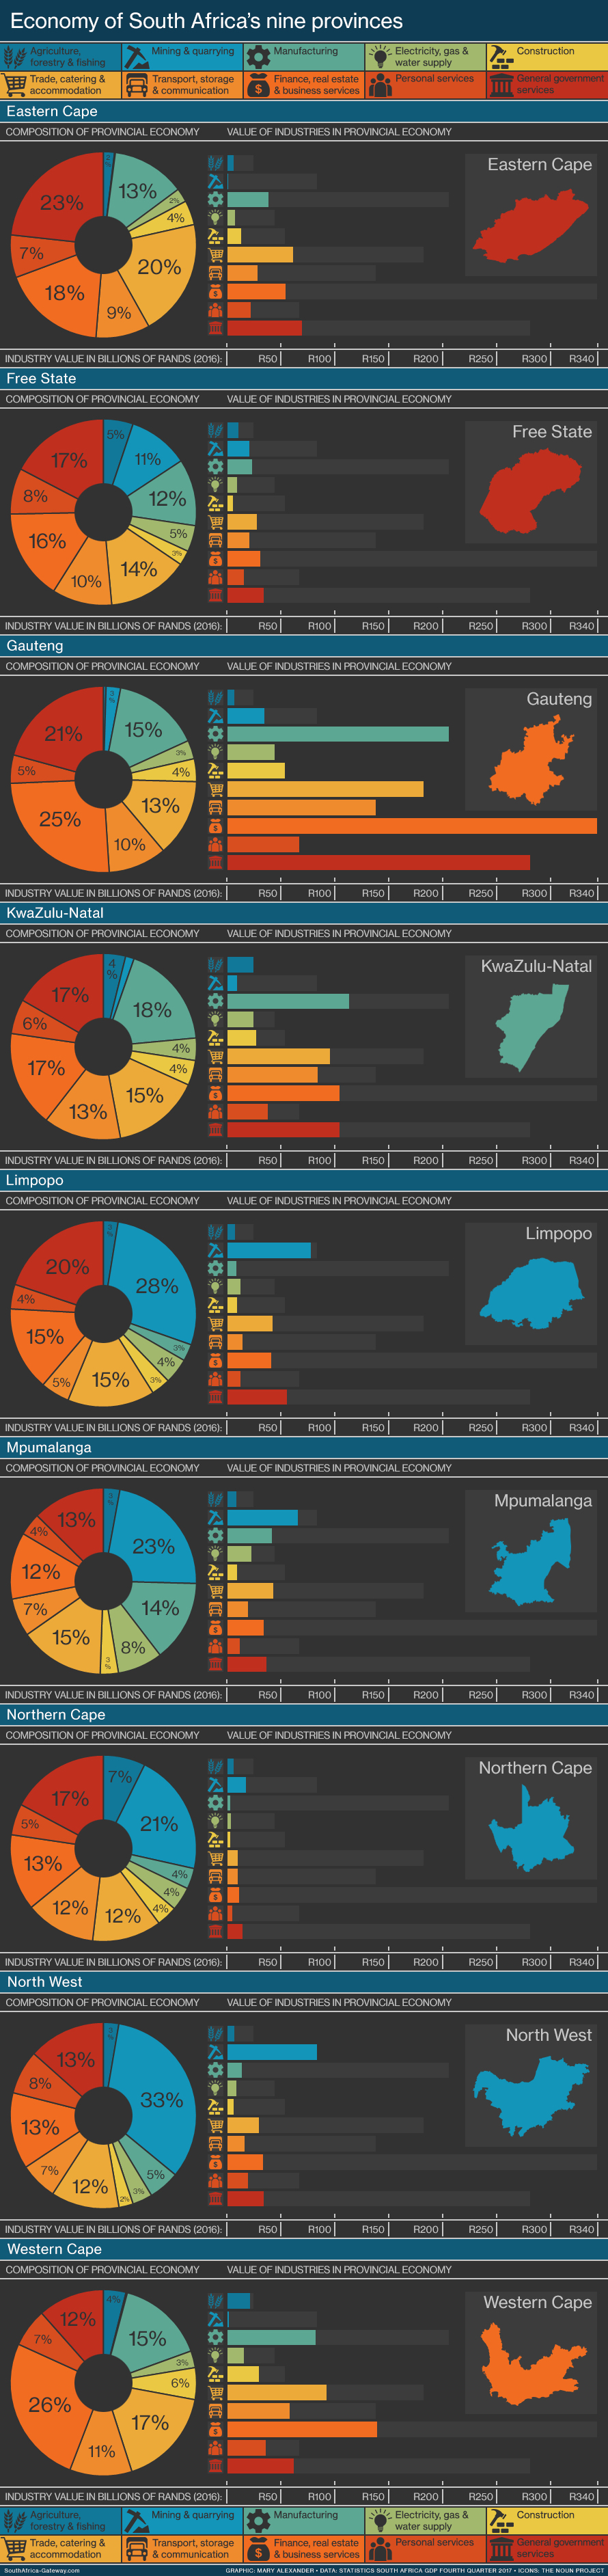 Infographic showing the size and composition of the economies of South Africa's nine provinces